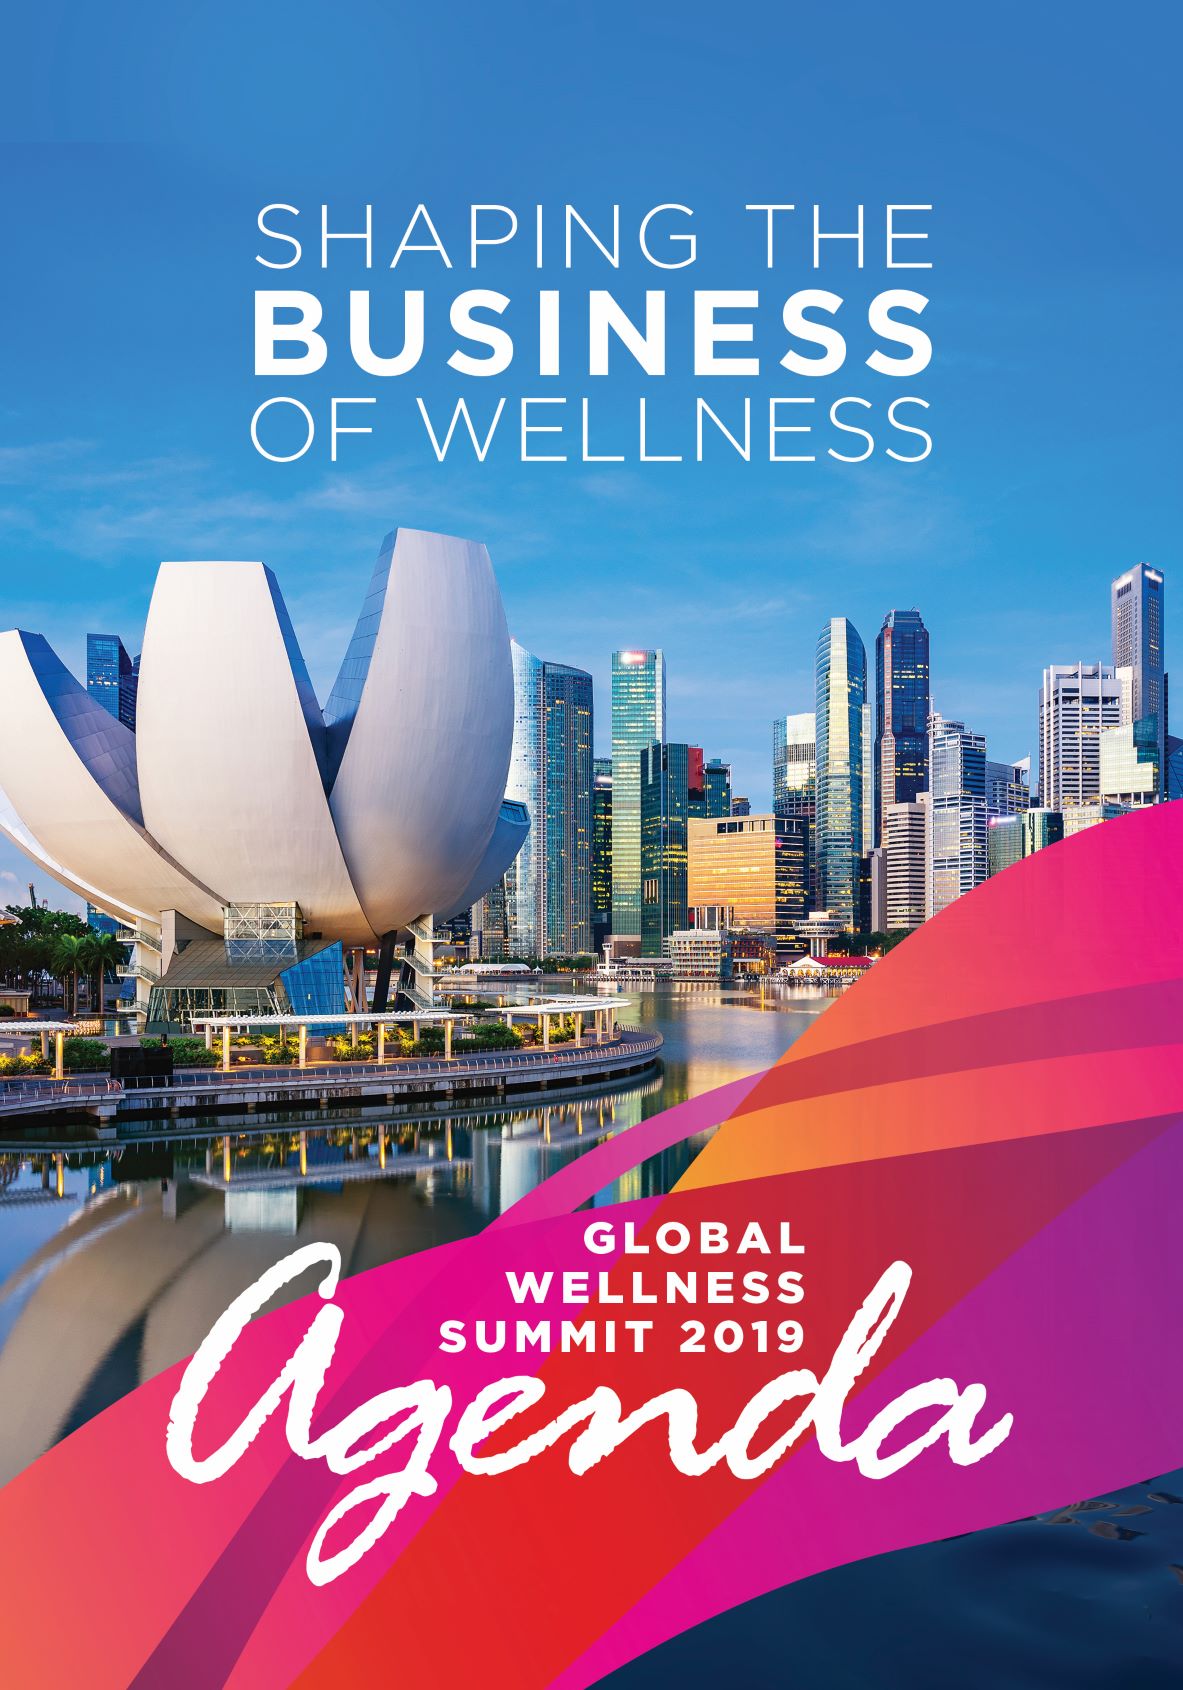 The Global Wellness Summit (GWS), the foremost gathering of international leaders in the $4.2 trillion global wellness economy, today released the full agenda for the 13th annual GWS at Grand Hyatt Si